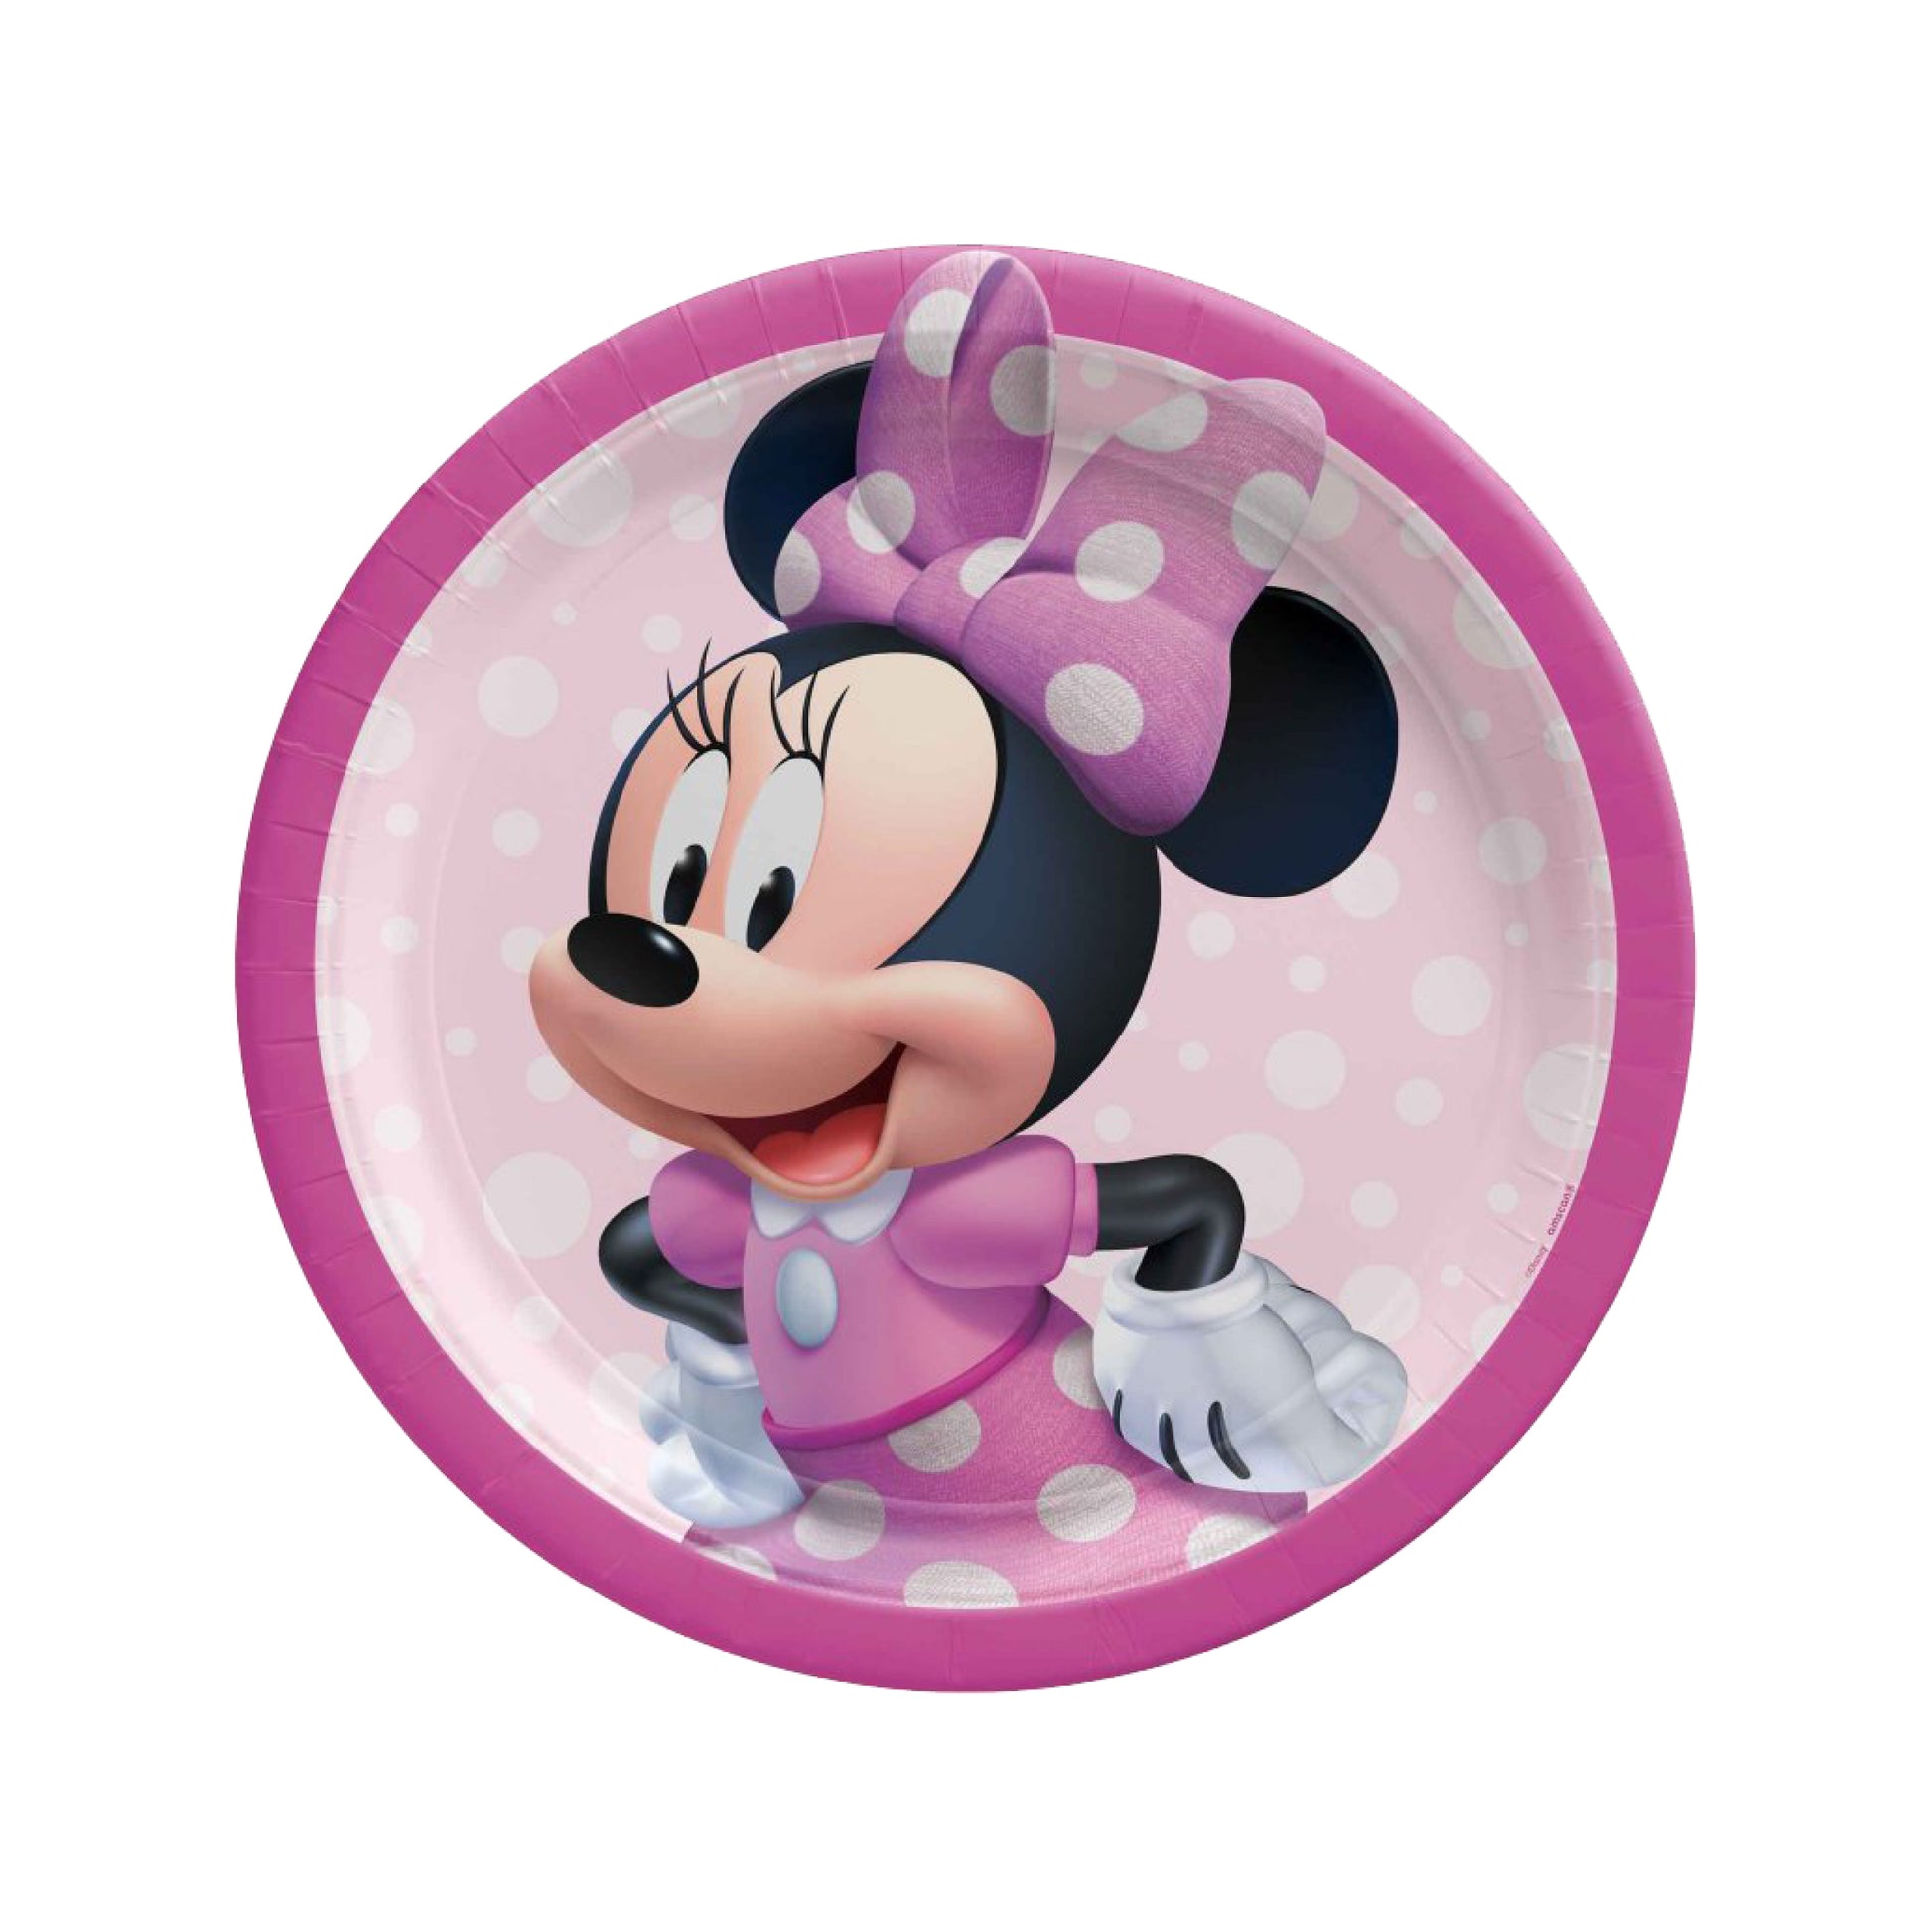 22 cm Minnie Mouse Round Paper Plates Pack of 8